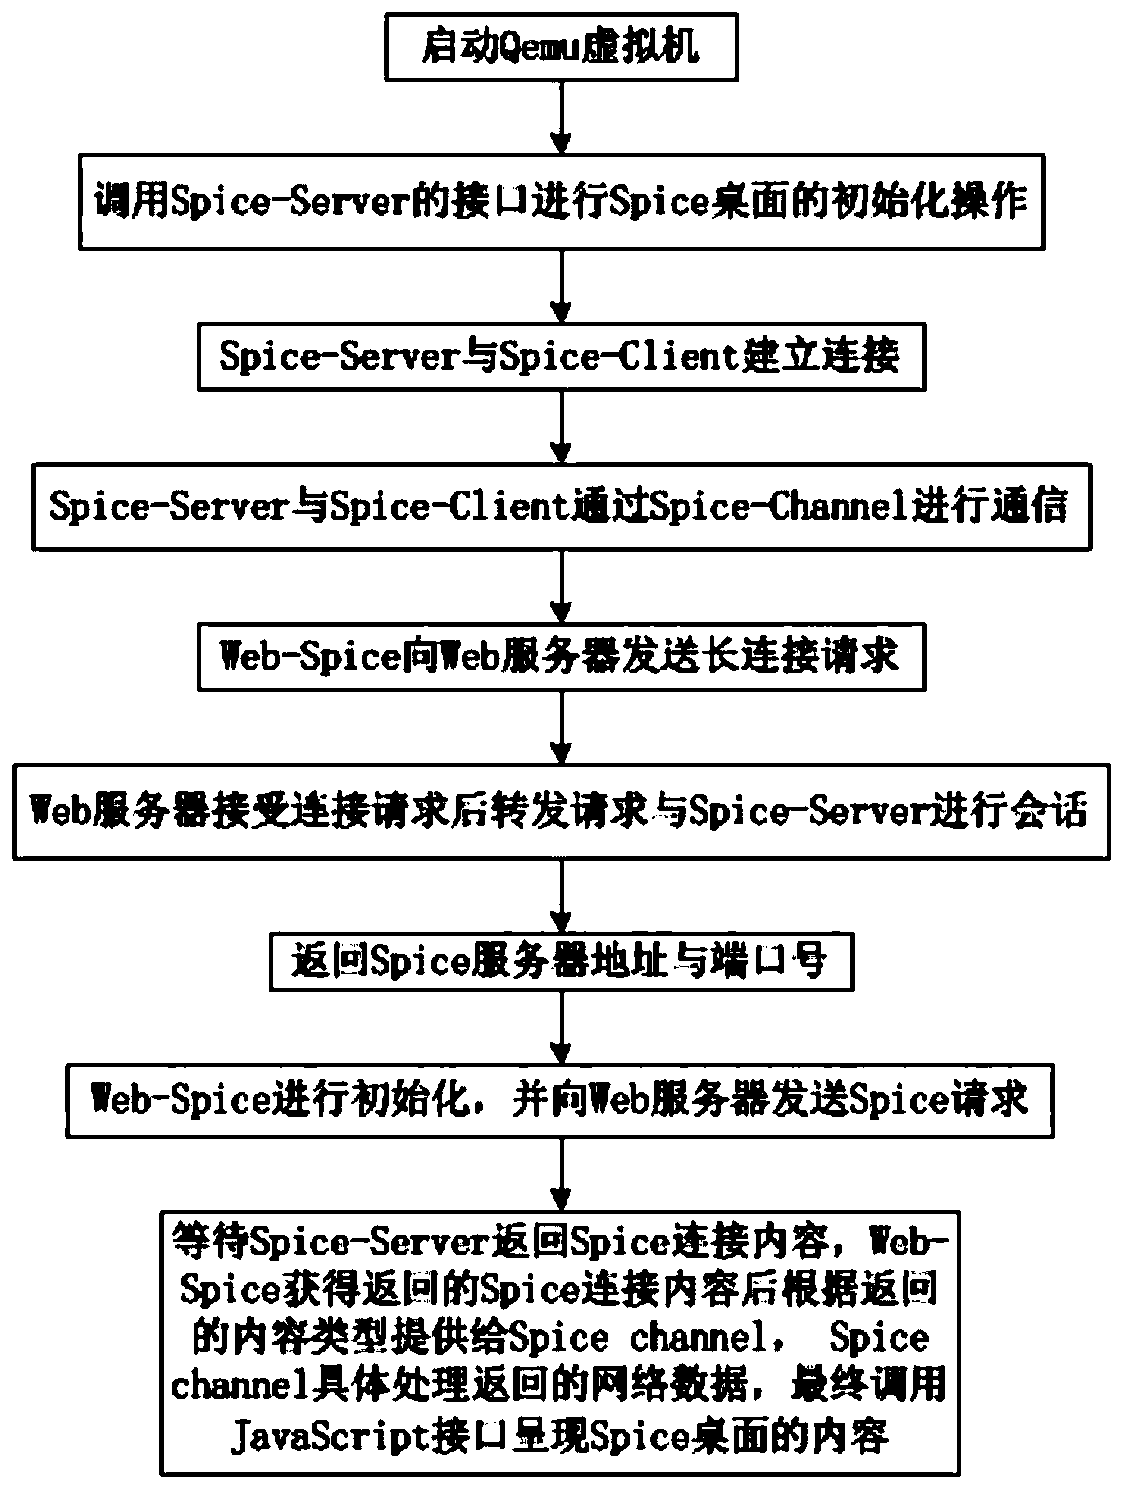 Method for accessing Spice remote desktop through webpage browser